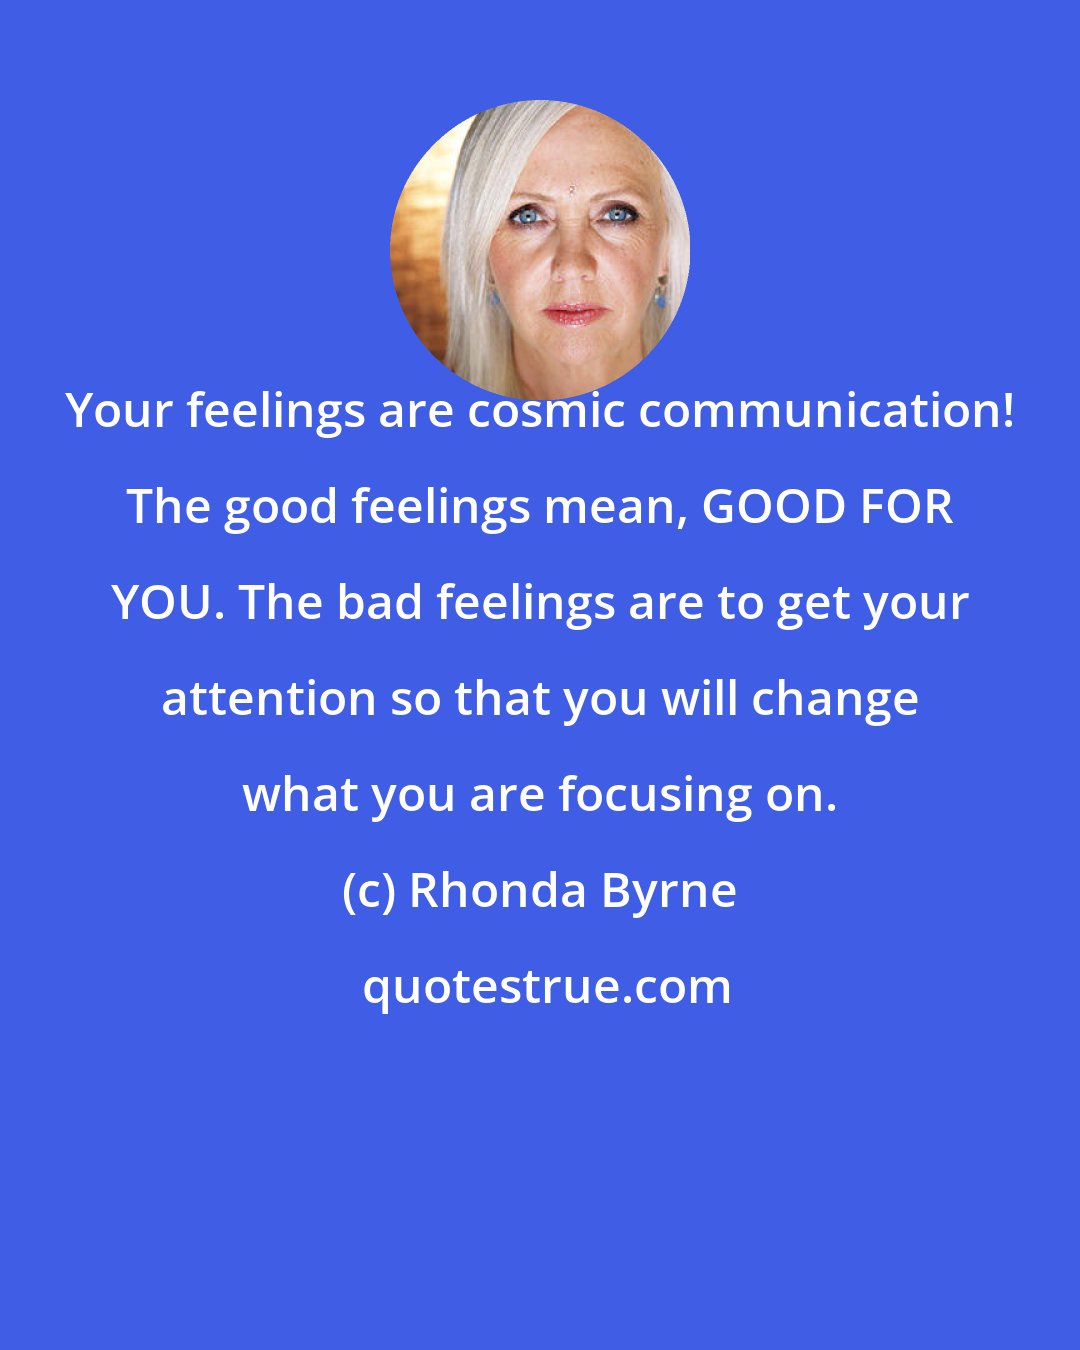 Rhonda Byrne: Your feelings are cosmic communication! The good feelings mean, GOOD FOR YOU. The bad feelings are to get your attention so that you will change what you are focusing on.